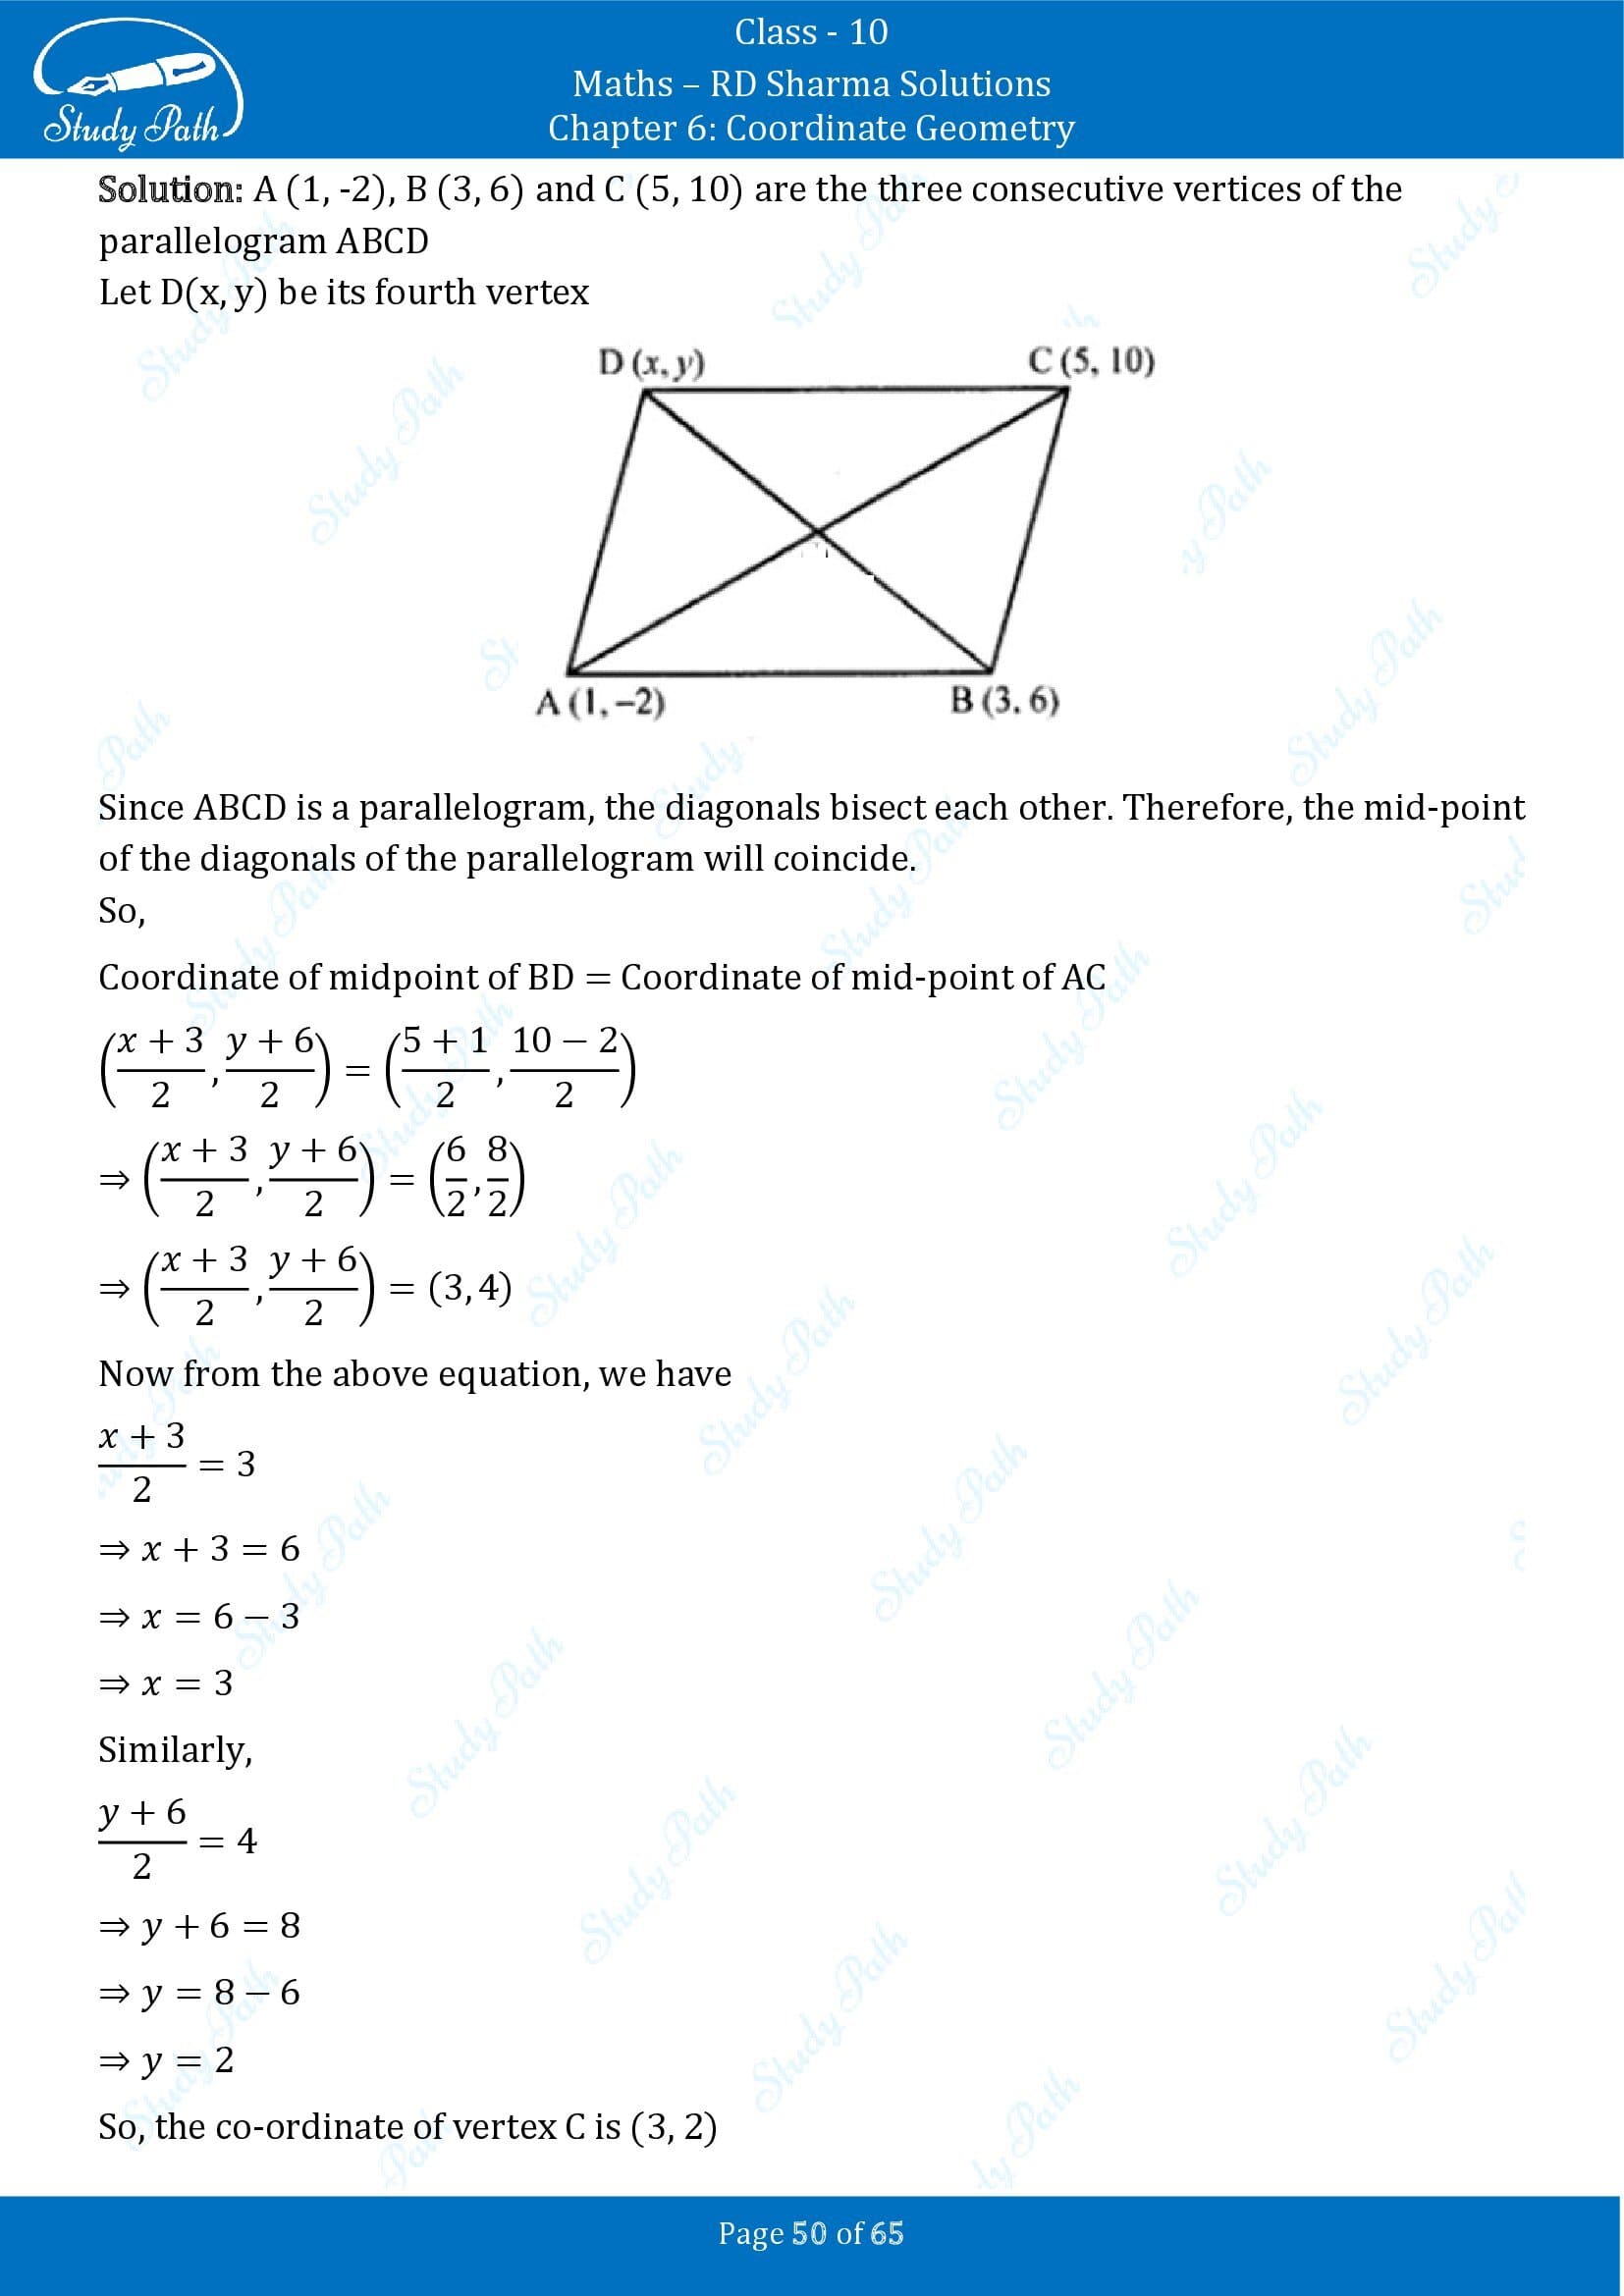 RD Sharma Solutions Class 10 Chapter 6 Coordinate Geometry Exercise 6.3 00050